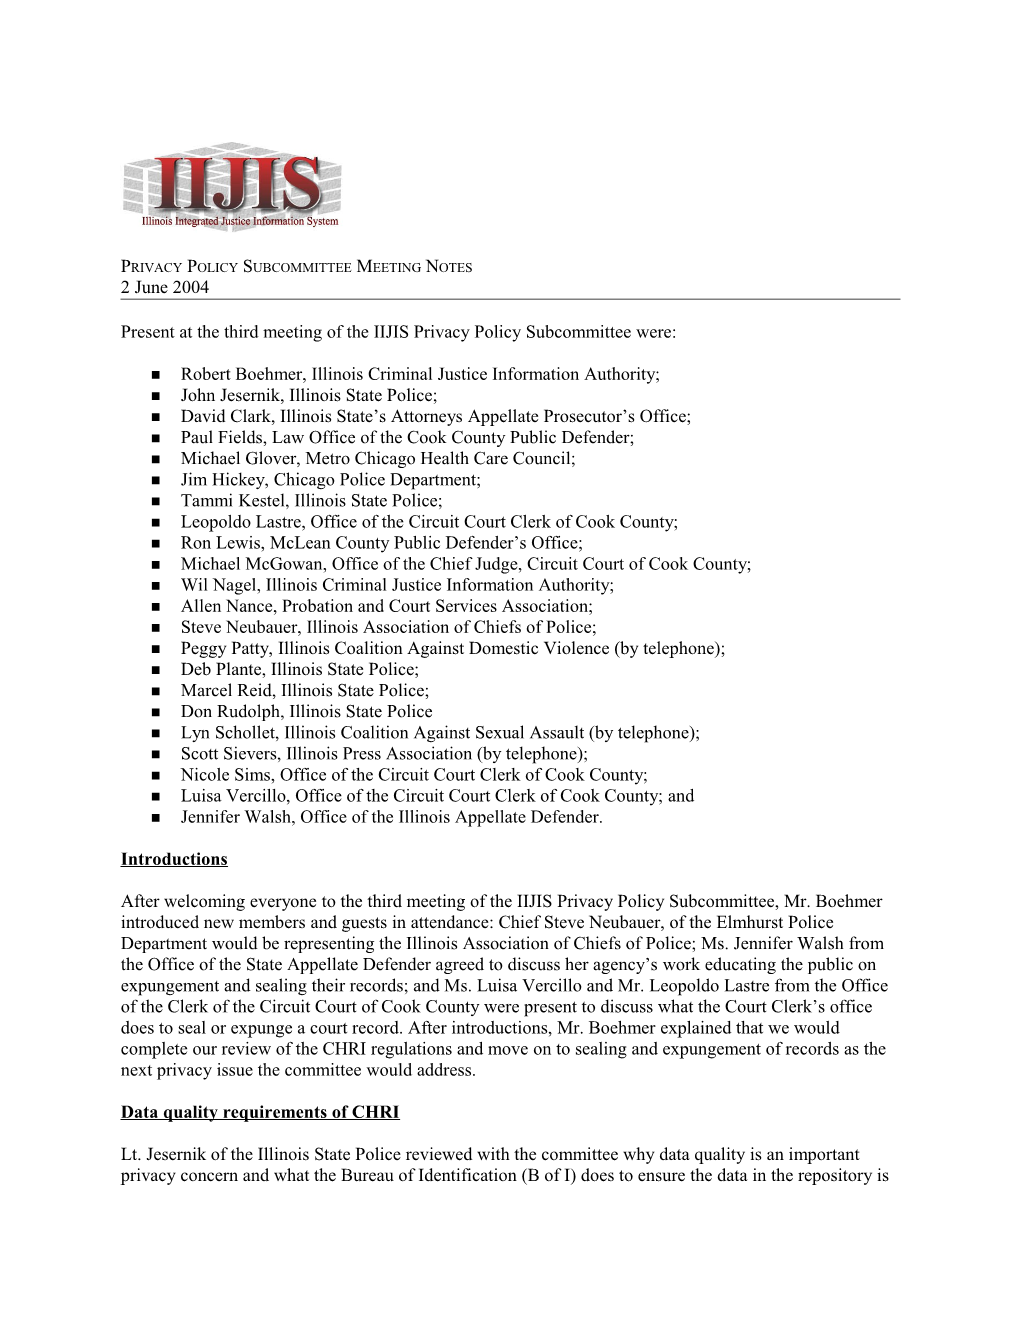 IIJIS Privacy Policy Subcommittee Meeting Notes